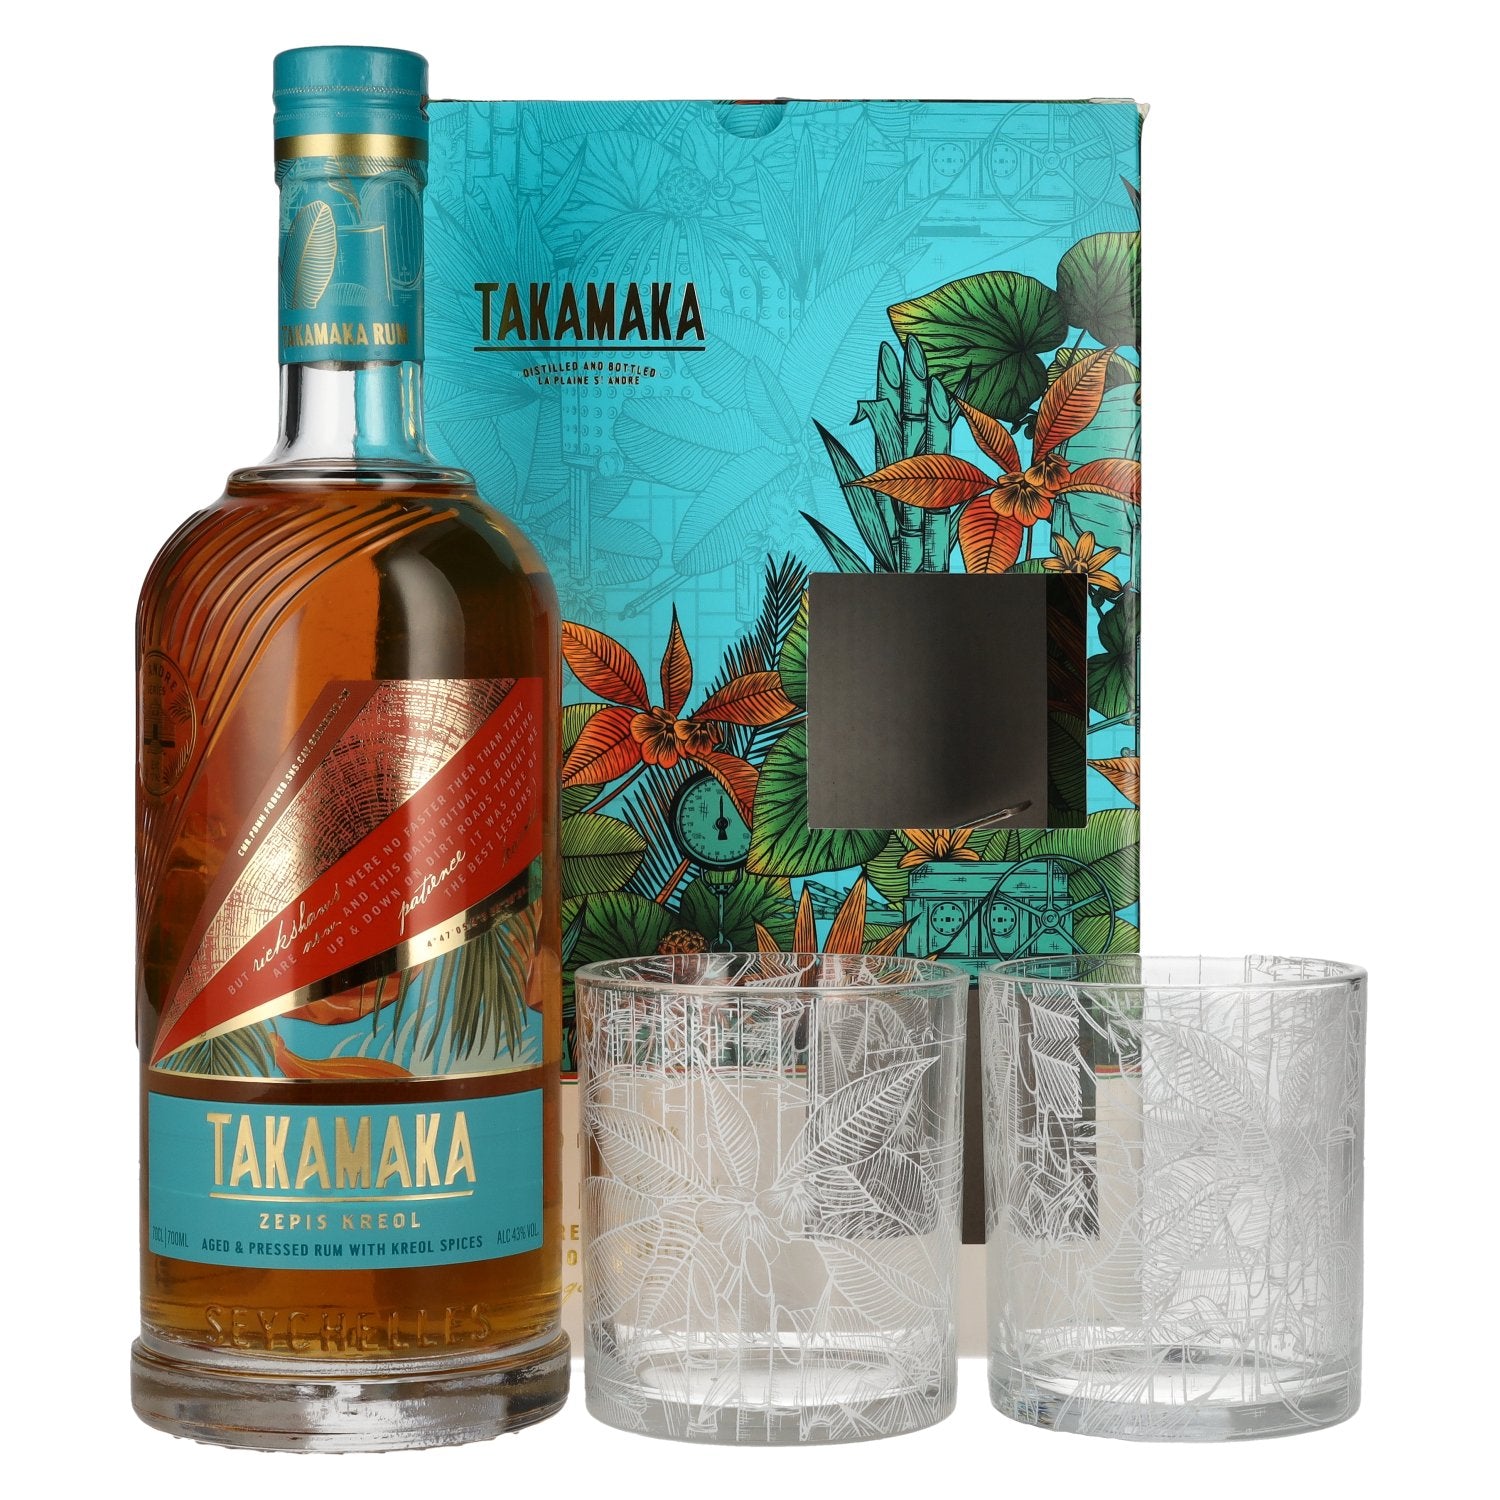 Takamaka ZEPIS KREOL Rum Limited Edition 43% Vol. 0,7l in Giftbox with 2 glasses